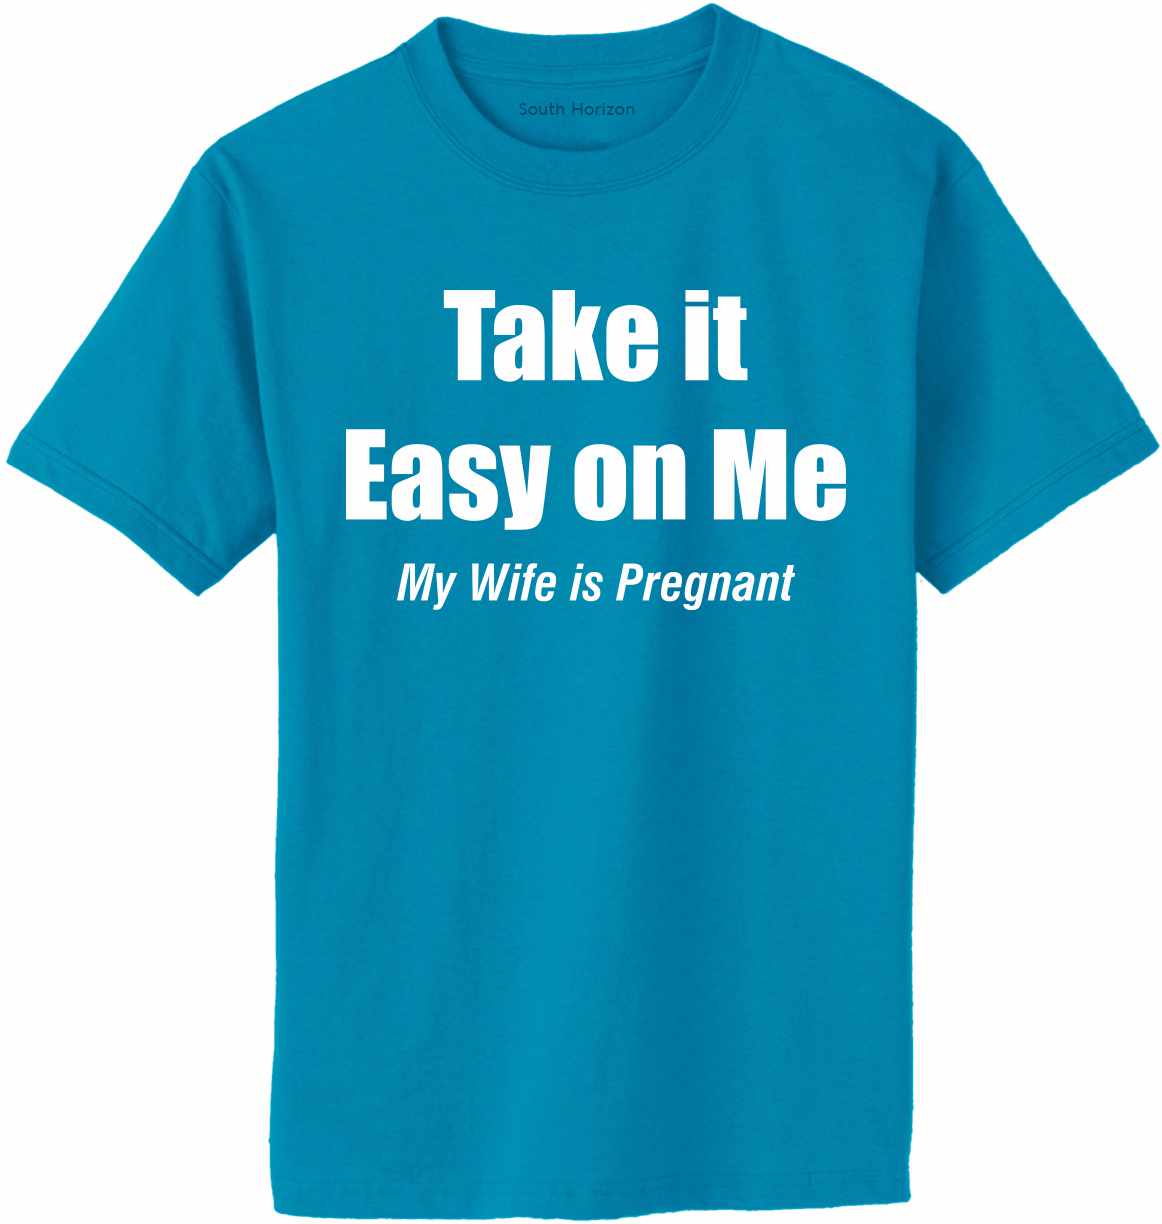 Take It Easy On Me, My Wife Is Pregnant Adult T-Shirt